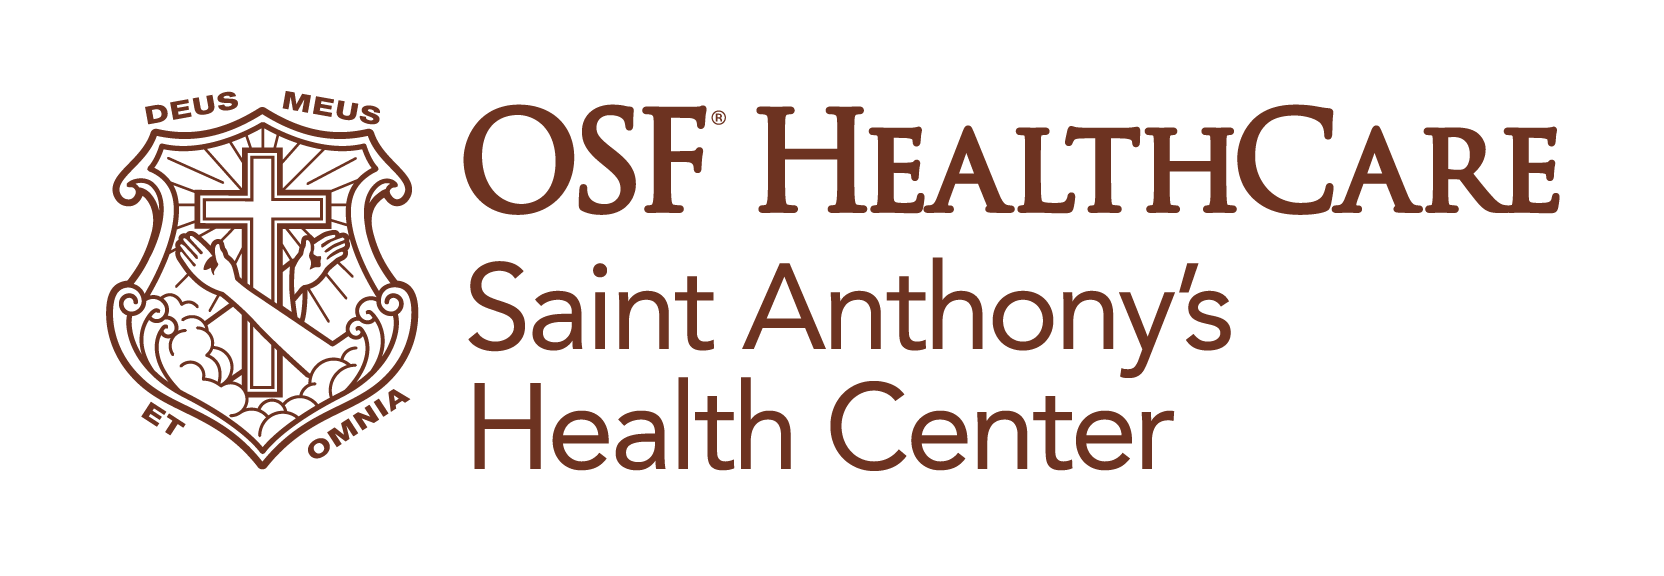 OSF Healthcare System